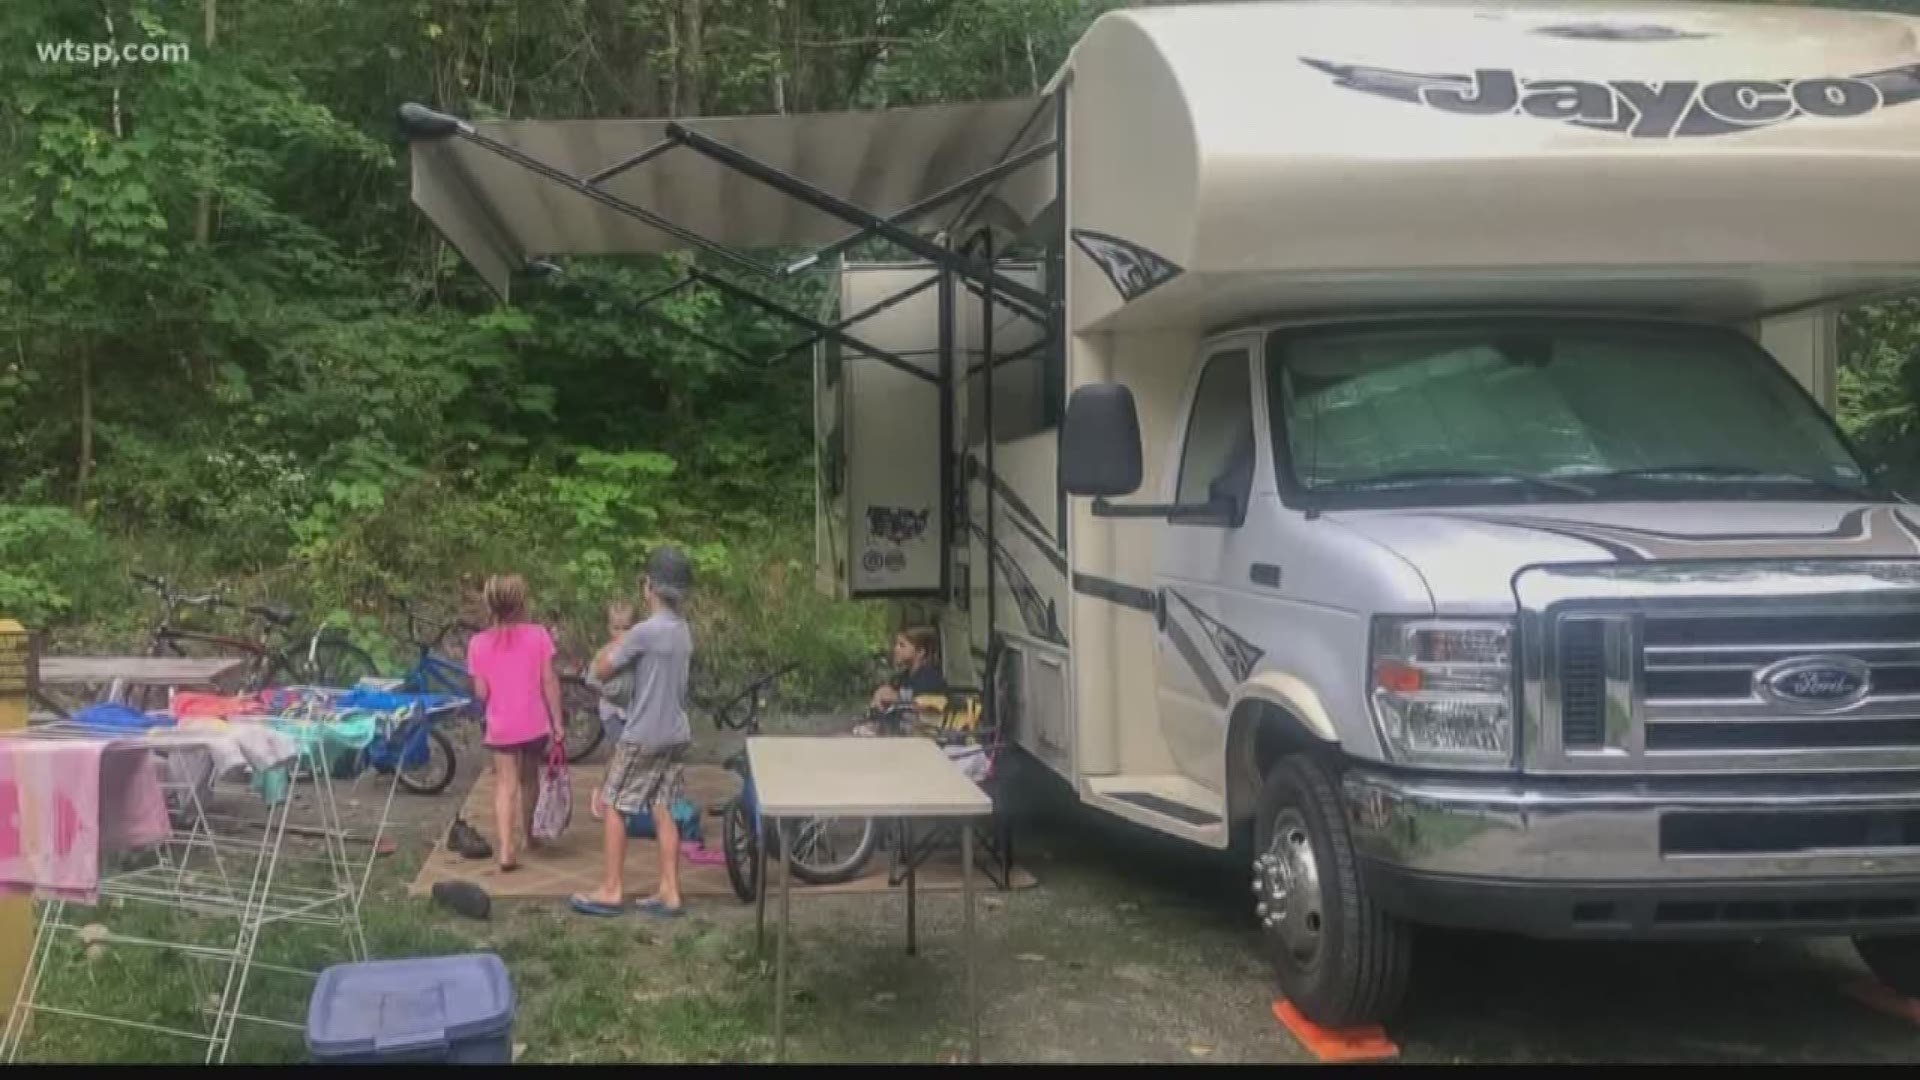 More families are choosing the RV lifestyle.